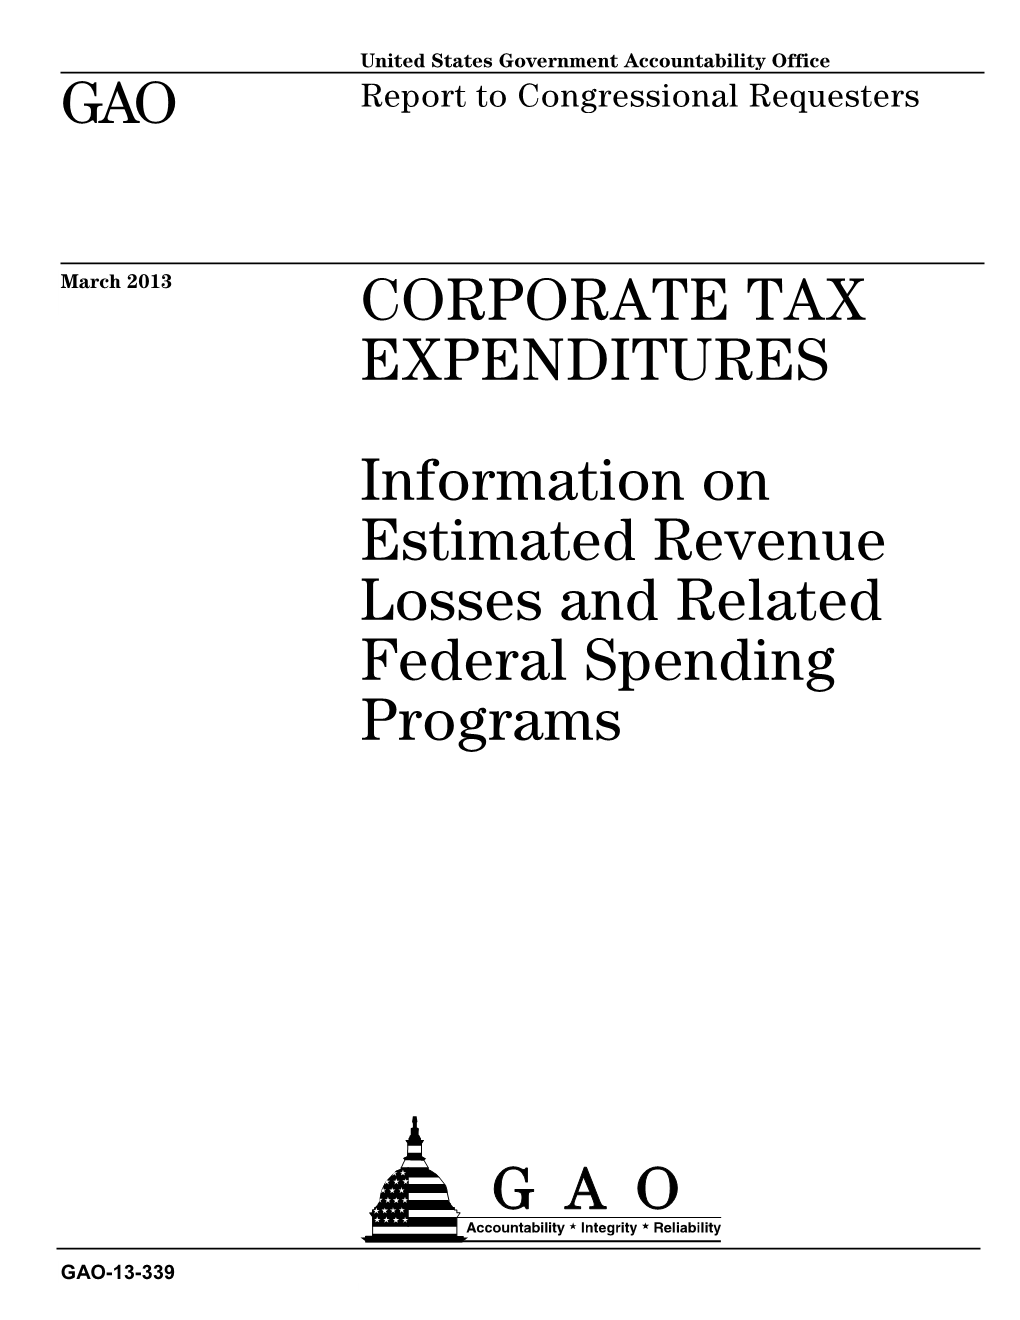 CORPORATE TAX EXPENDITURES Information on Estimated Revenue Losses and Related Federal Spending Programs